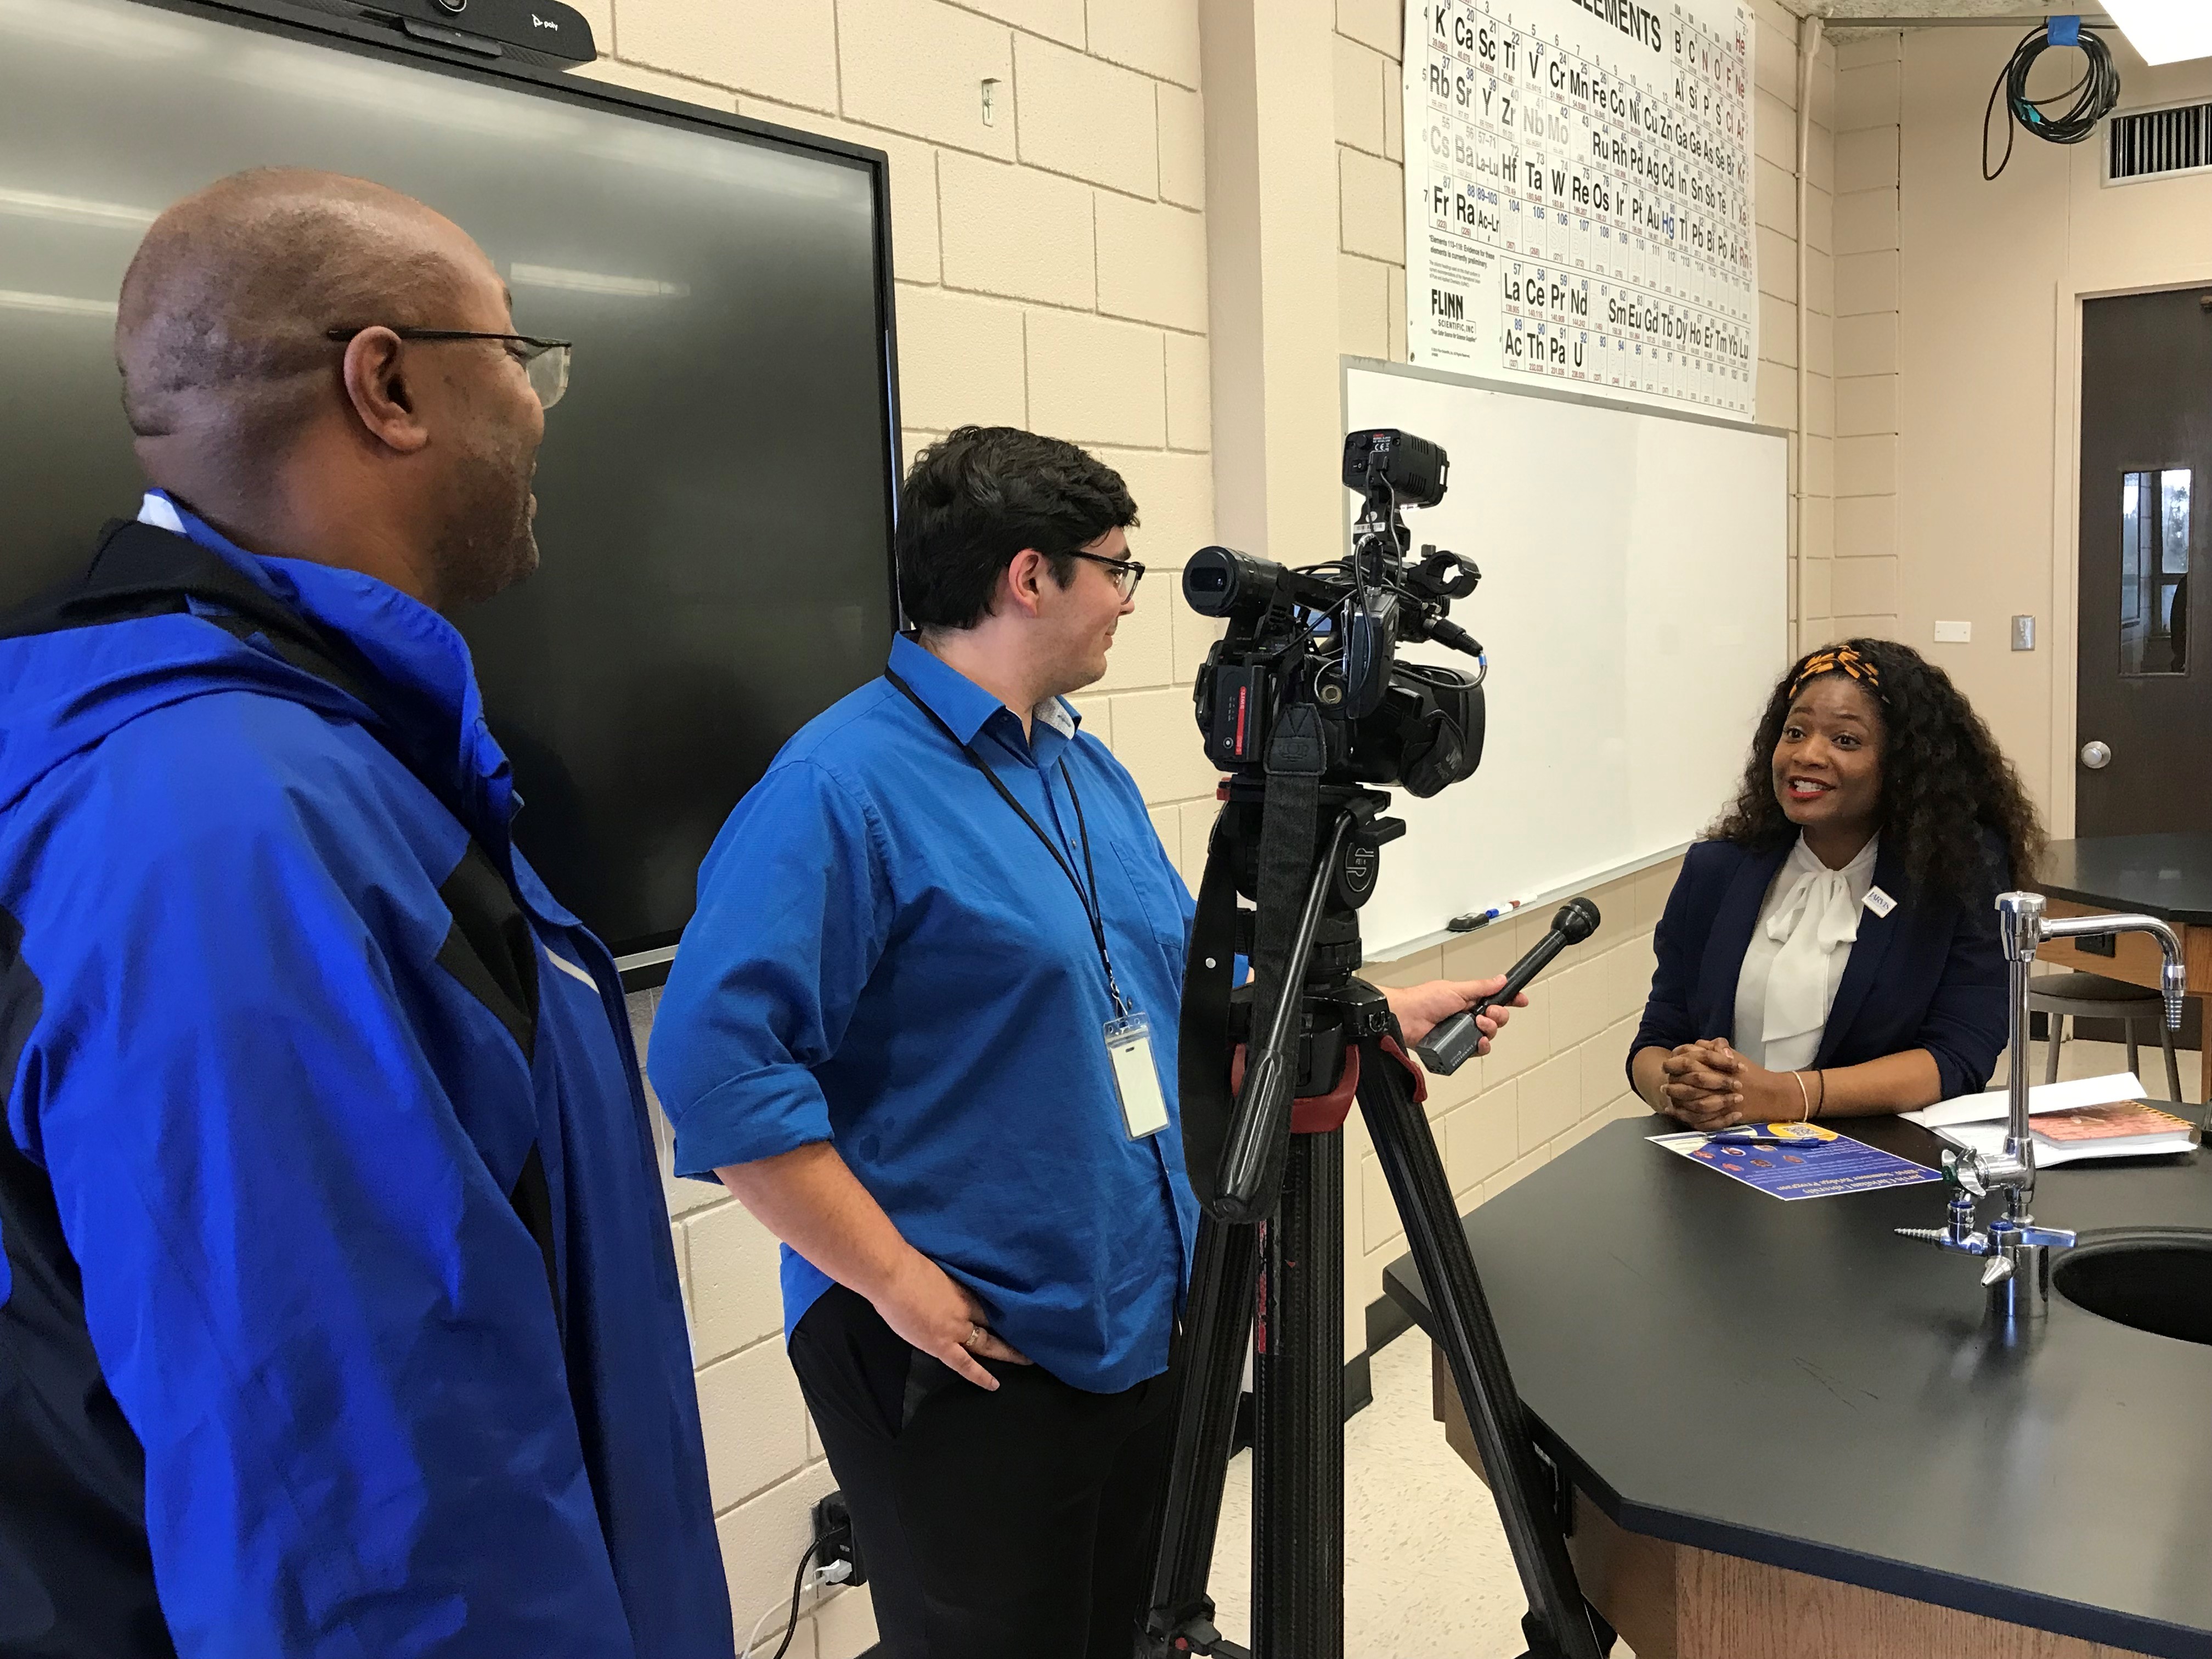 KLTV reporters interview Dr. Antoinesha Hollman about the new program.